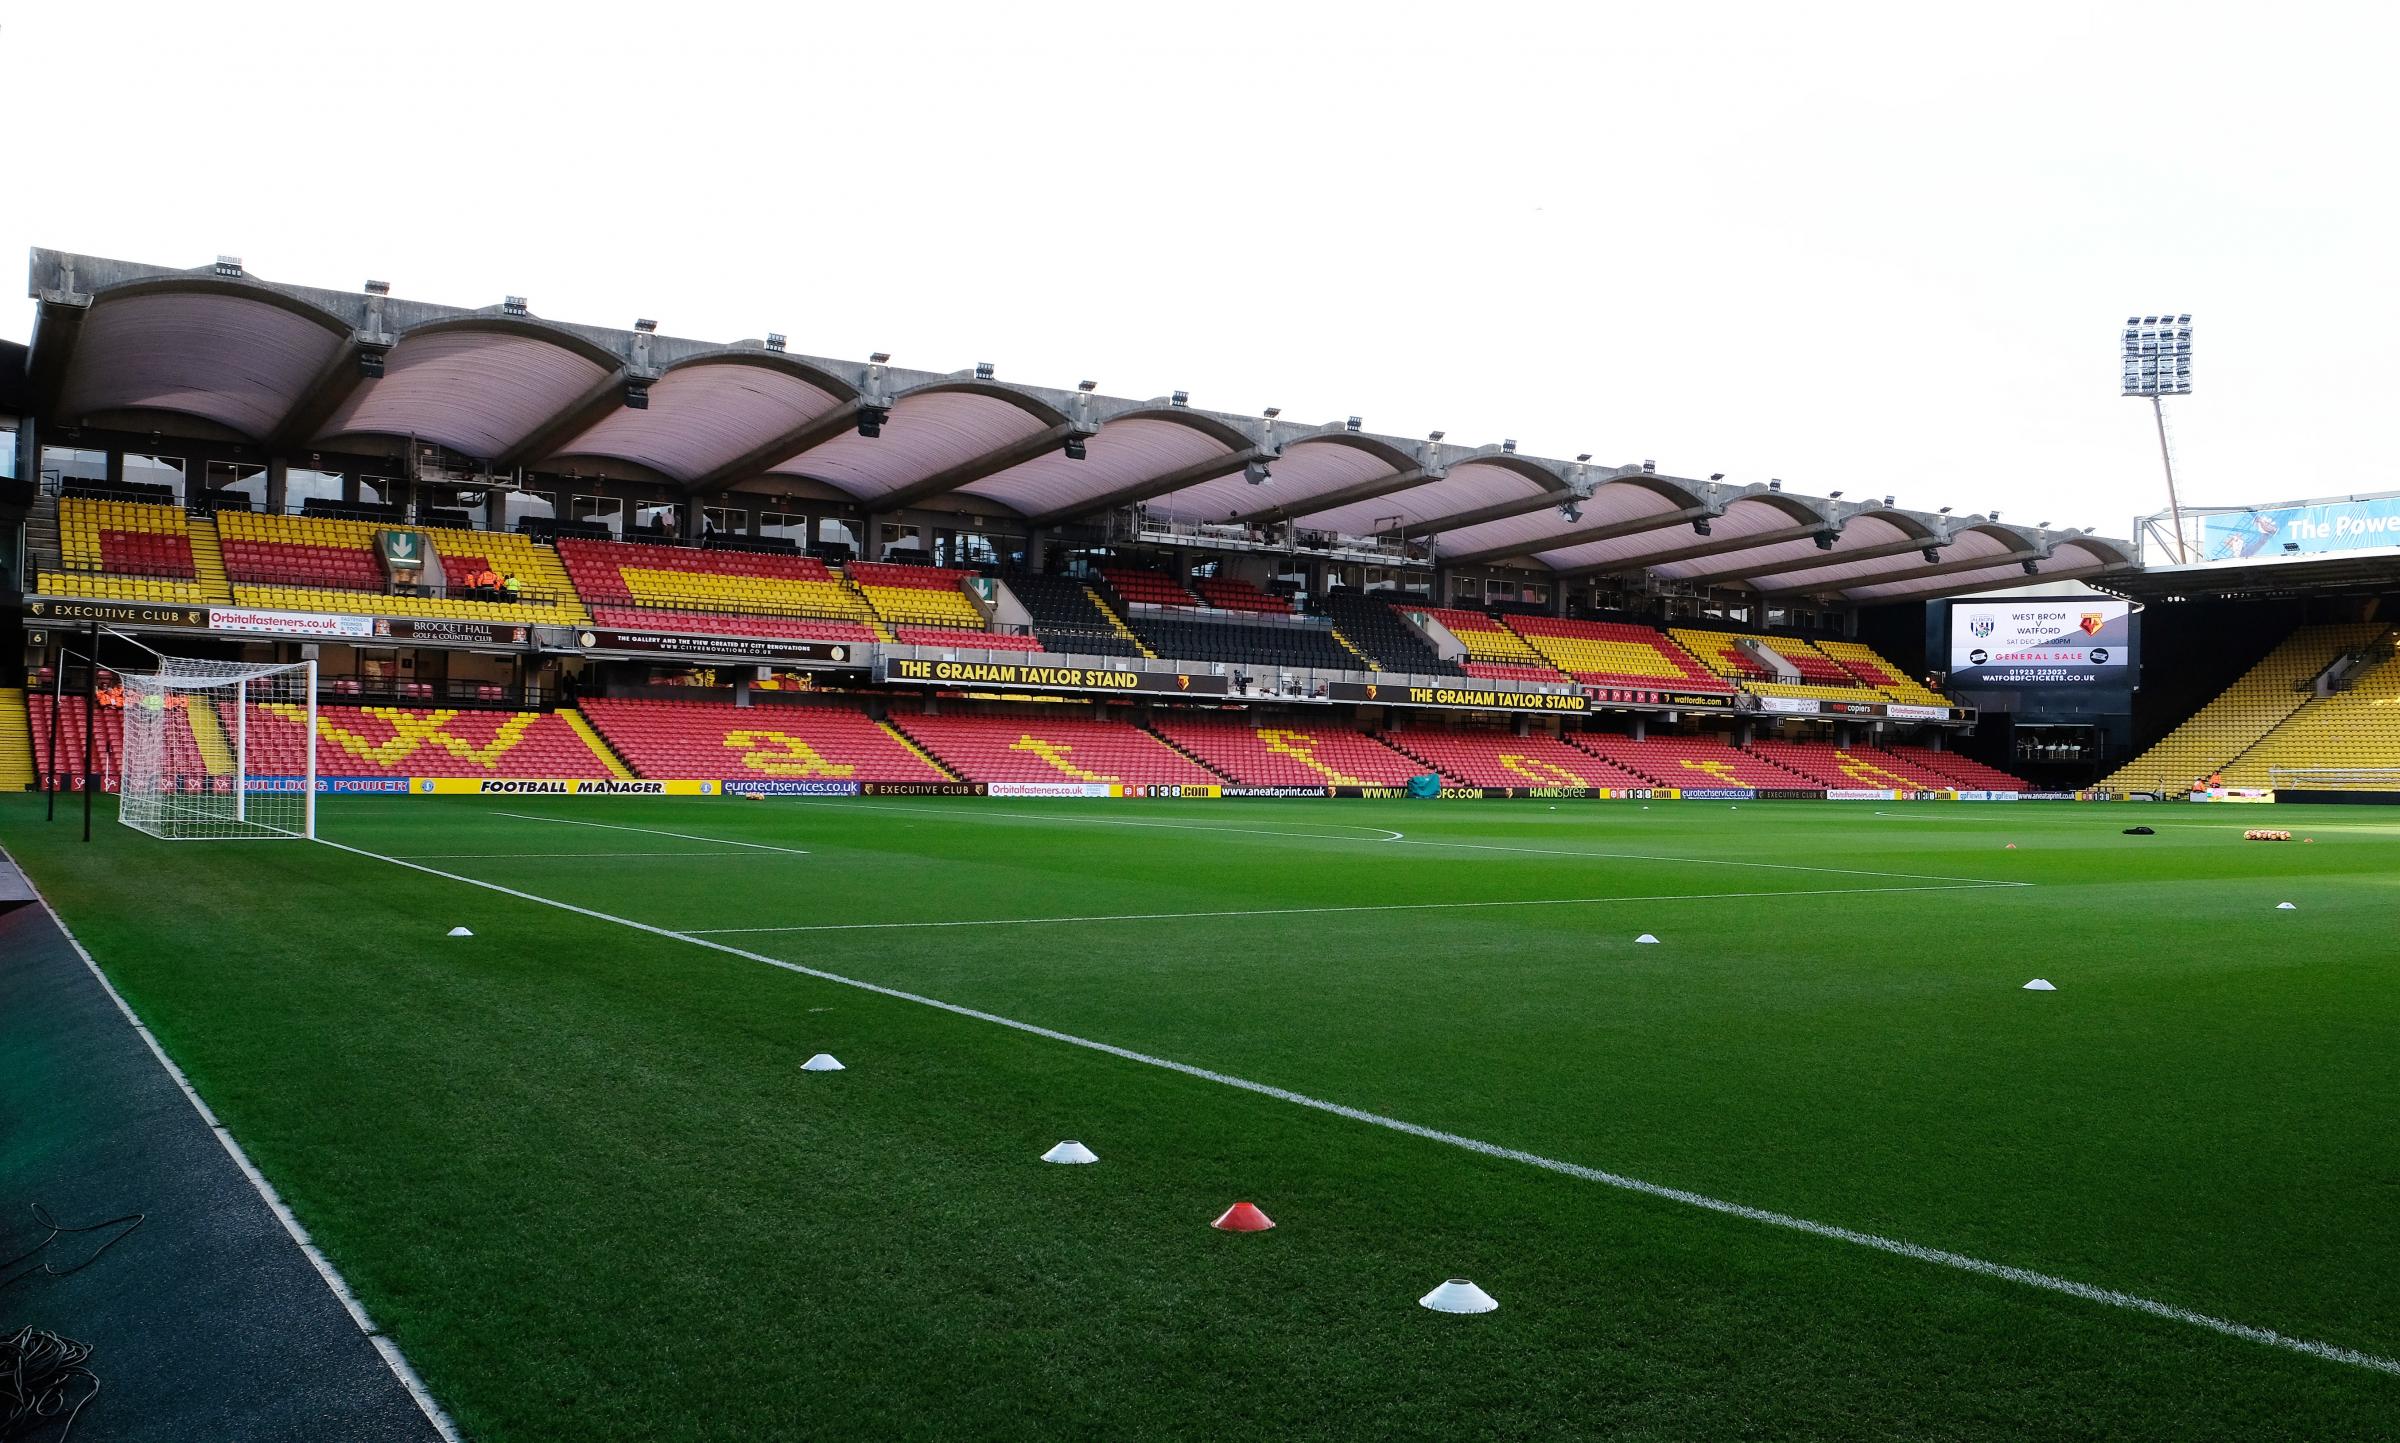 No fans will be allowed into Vicarage Road. Credit: Action Images